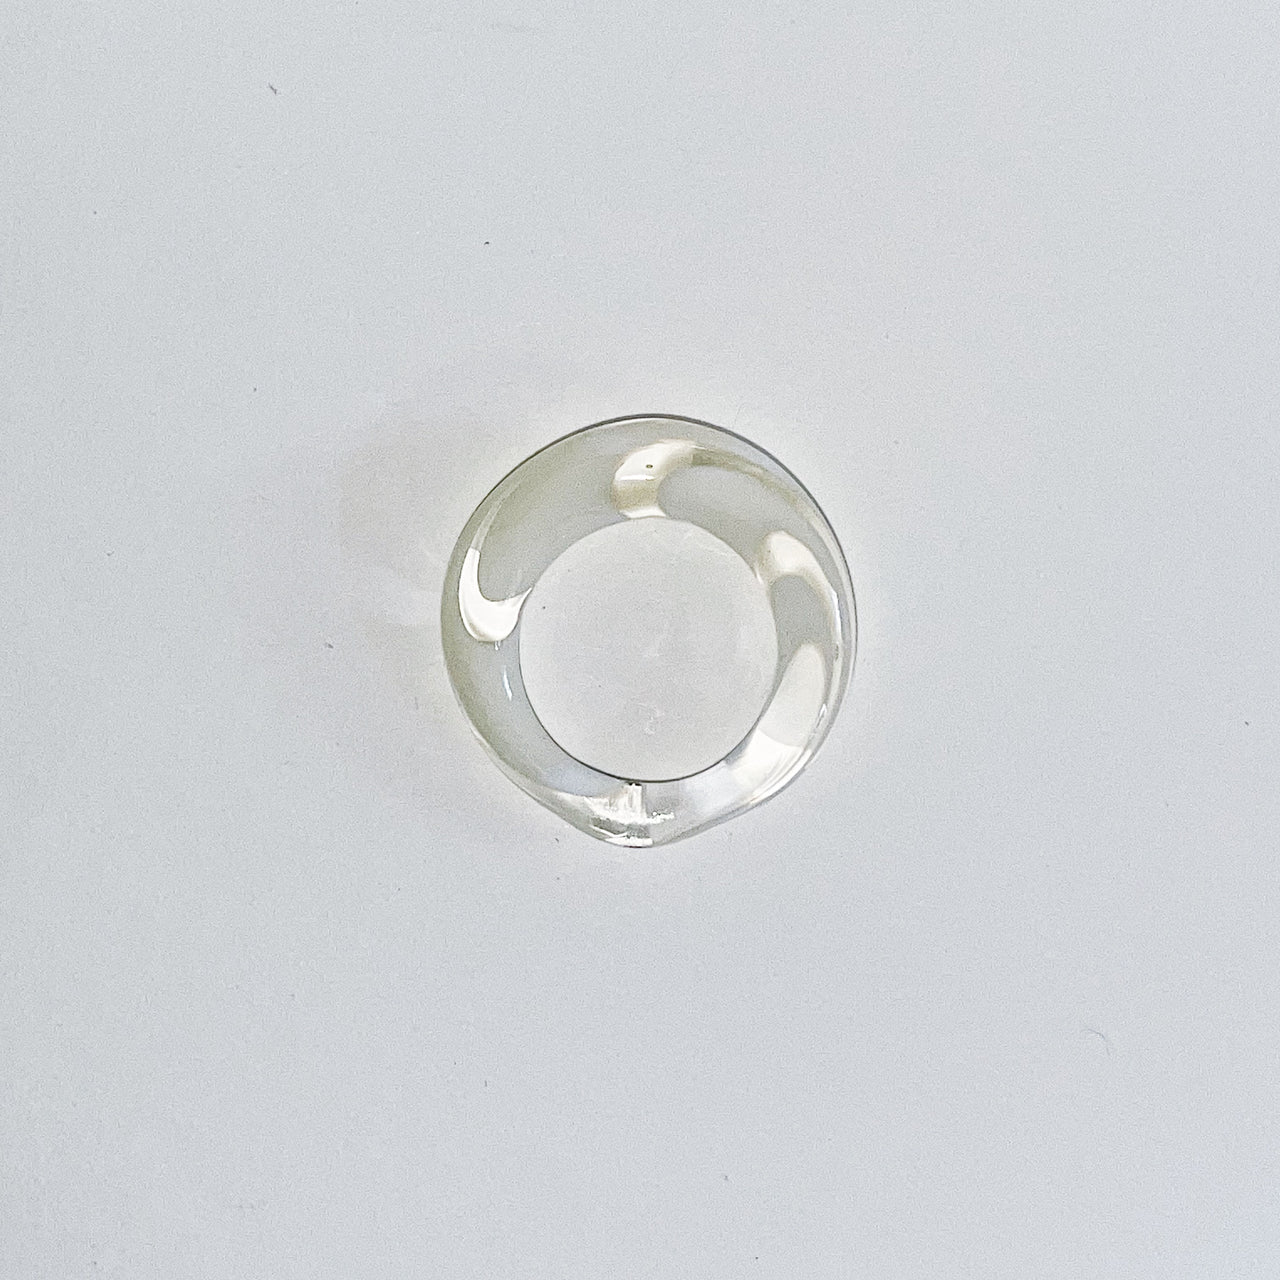 Turkish Delight Spiral Glass Ring